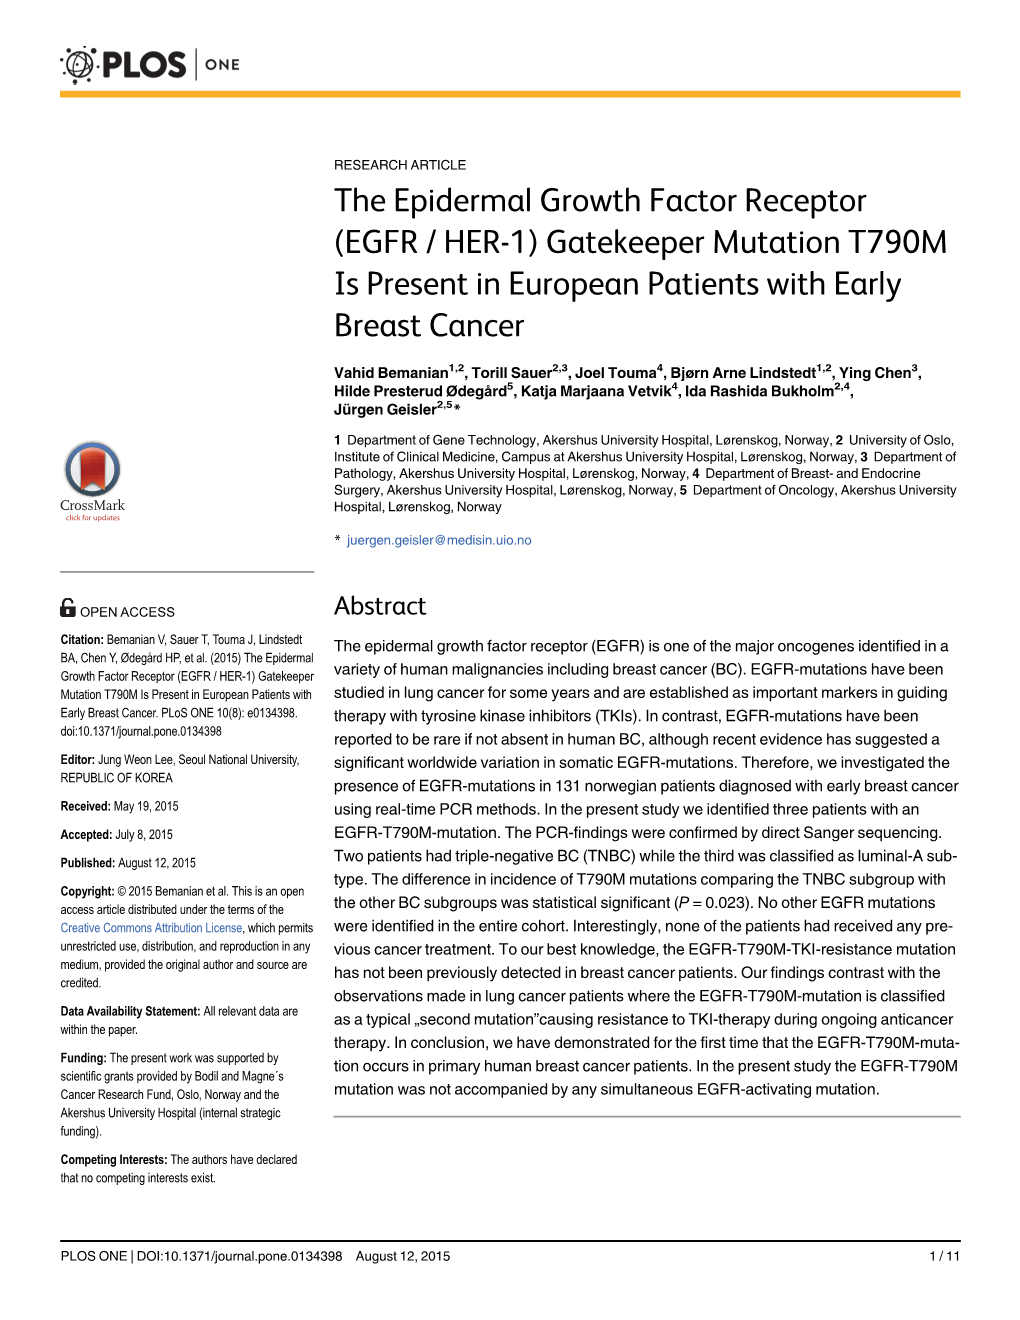 The Epidermal Growth Factor Receptor (EGFR / HER-1) Gatekeeper Mutation T790M Is Present in European Patients with Early Breast Cancer